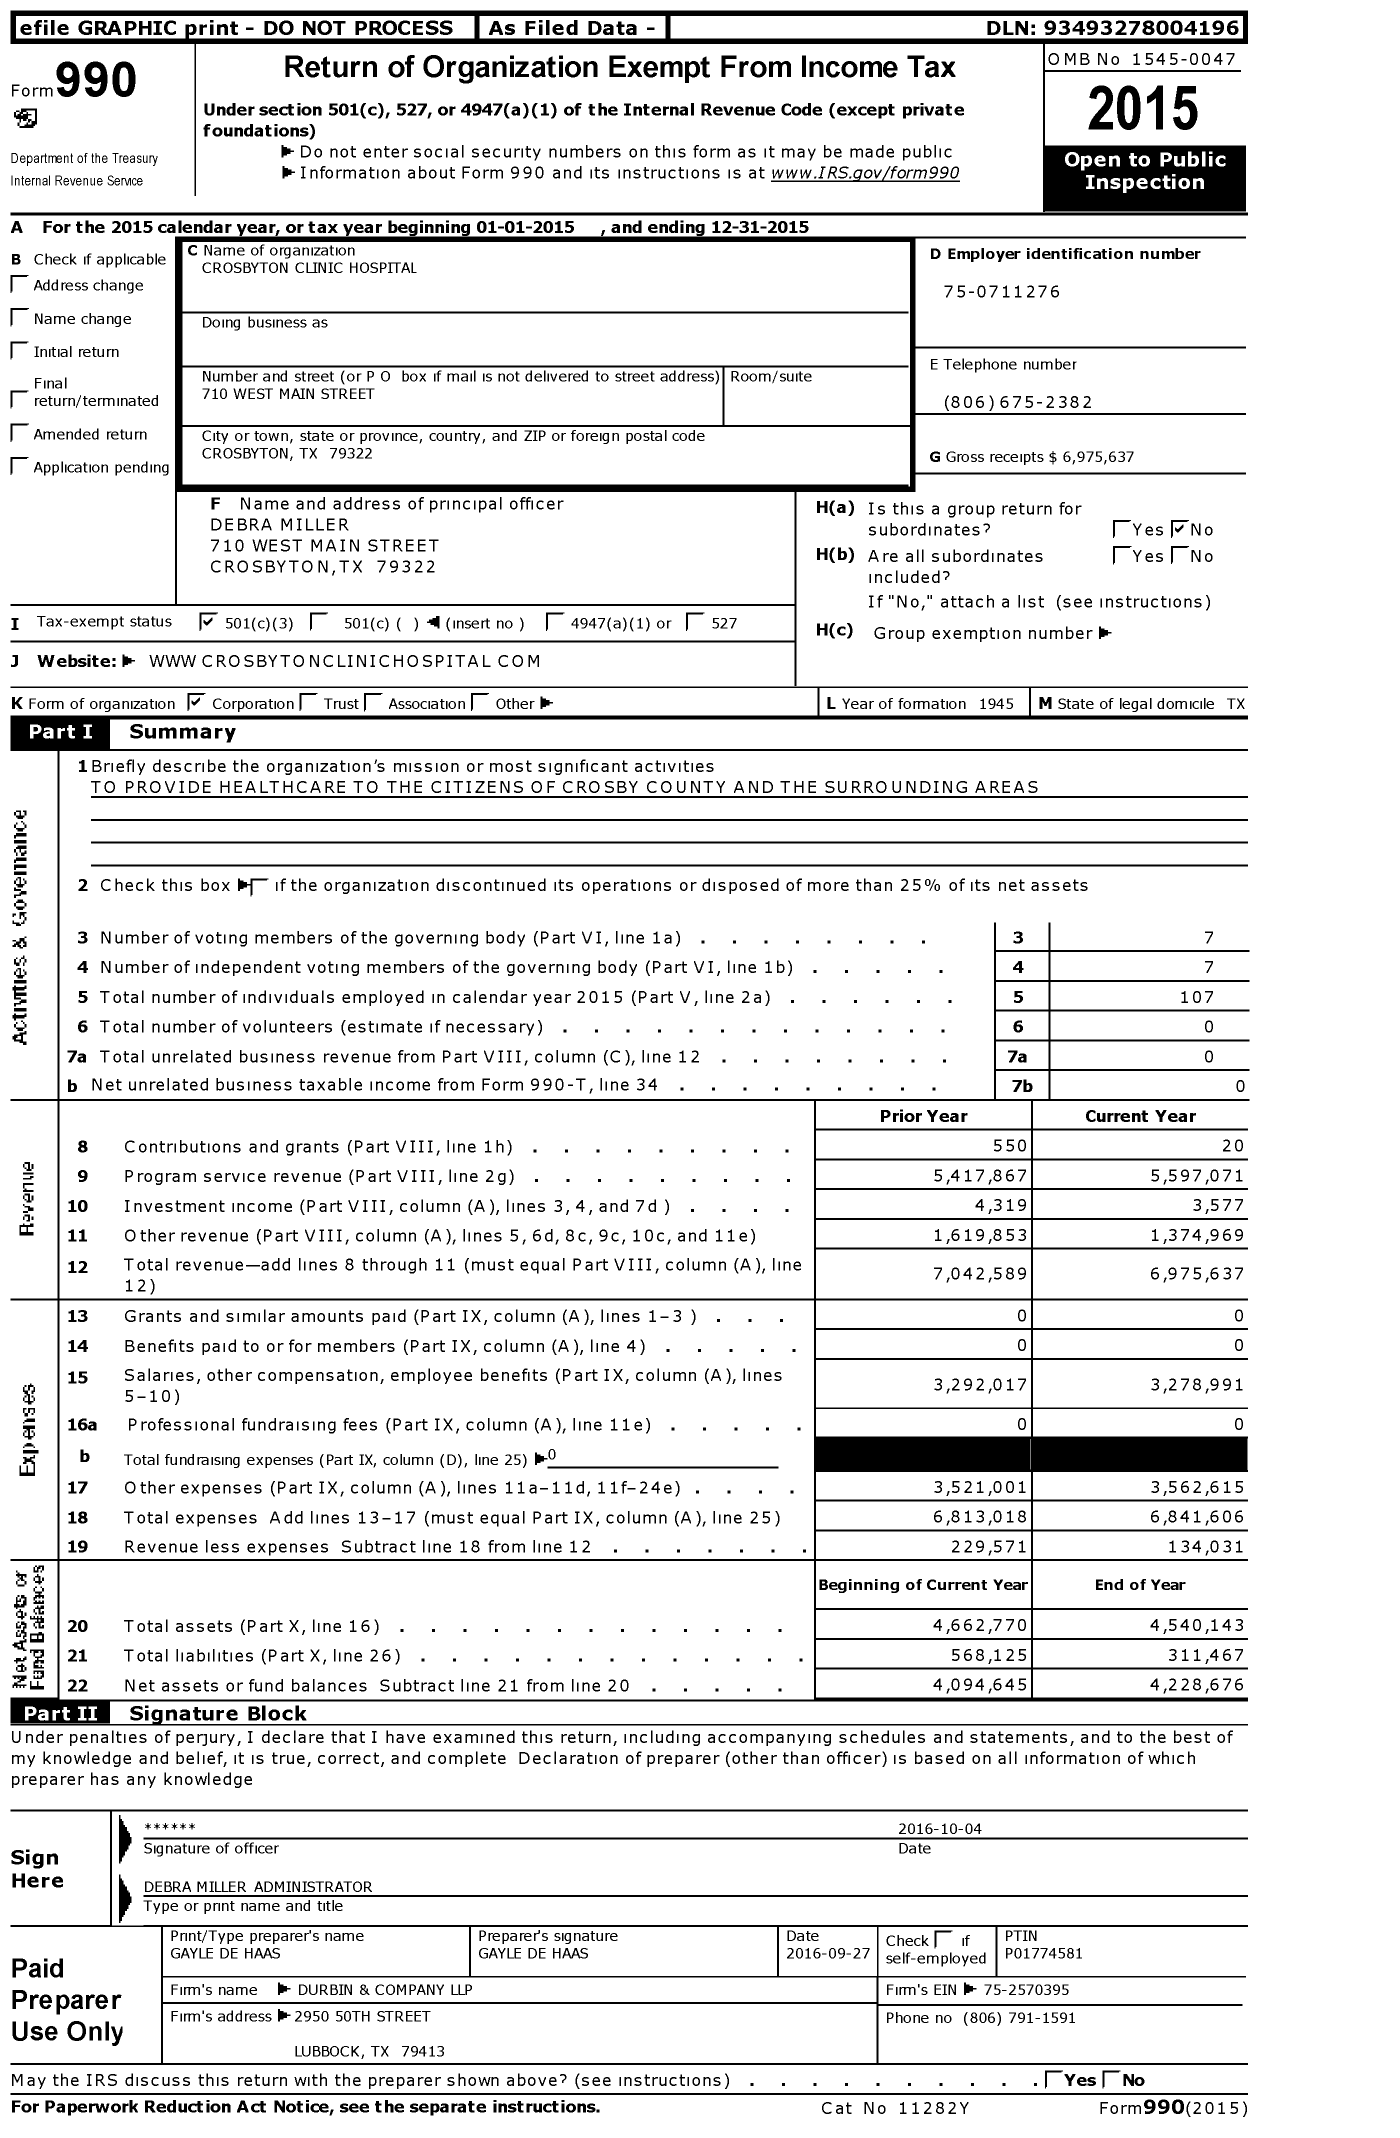 Image of first page of 2015 Form 990 for Crosbyton Clnic Hospital